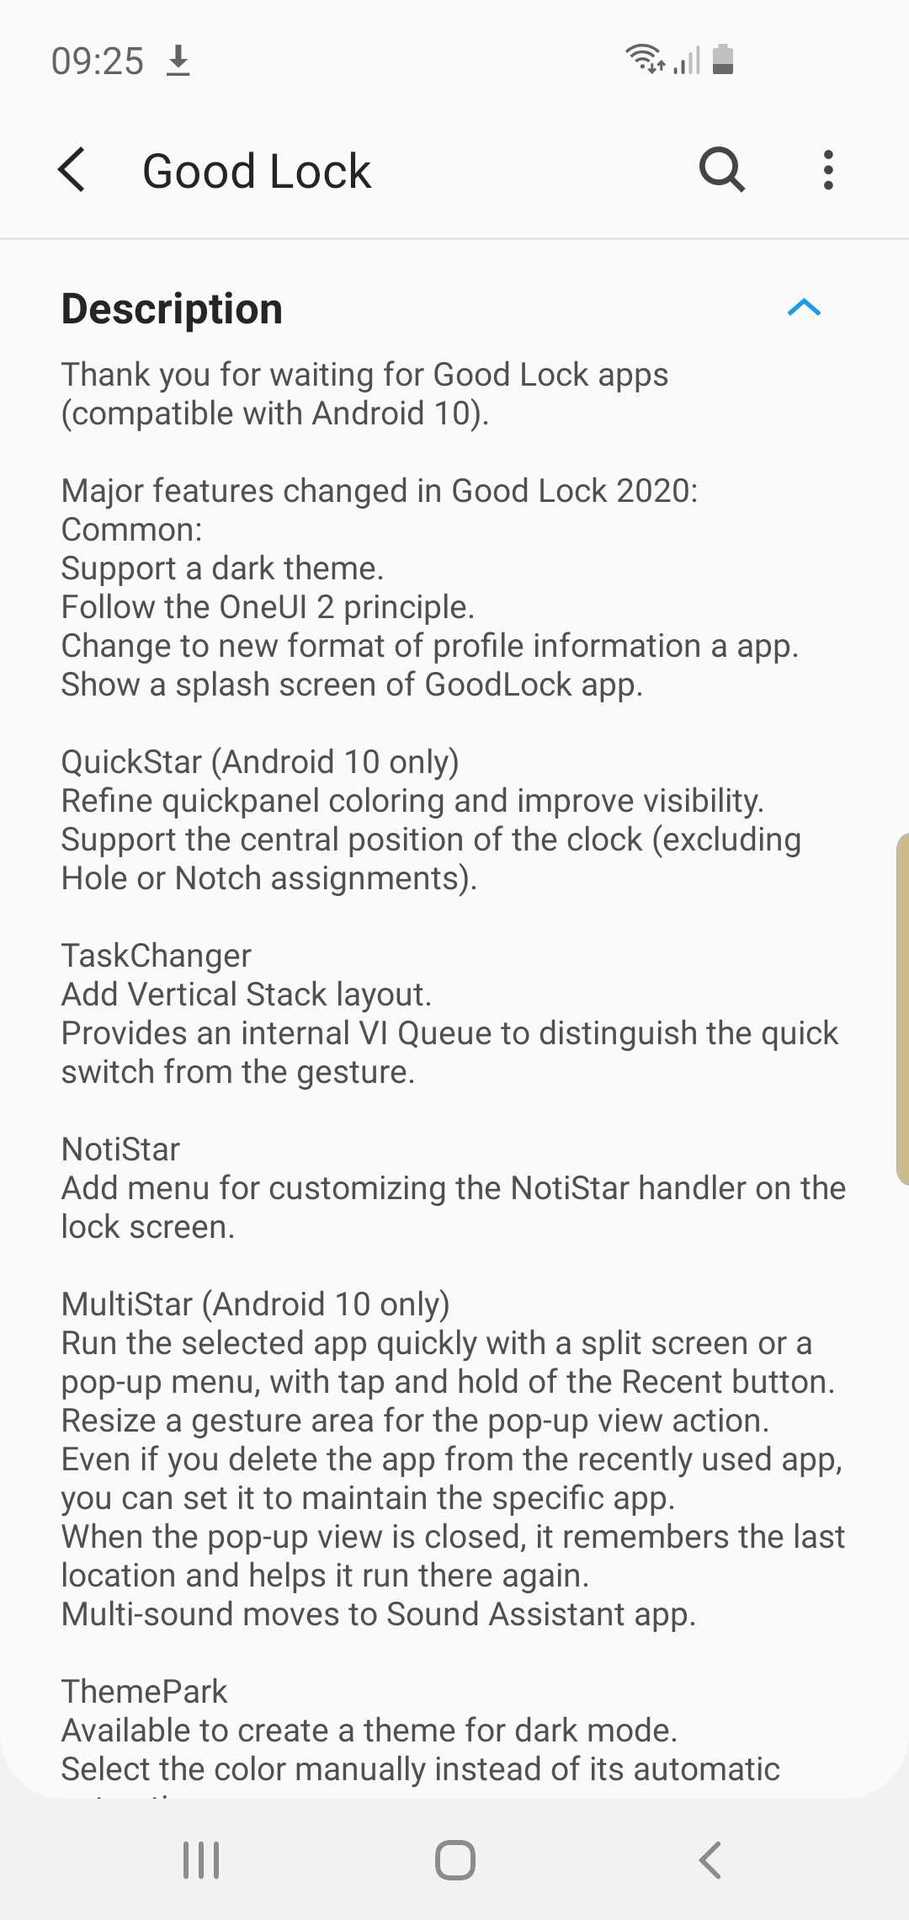 A look at the Good Lock 2020 changelog.